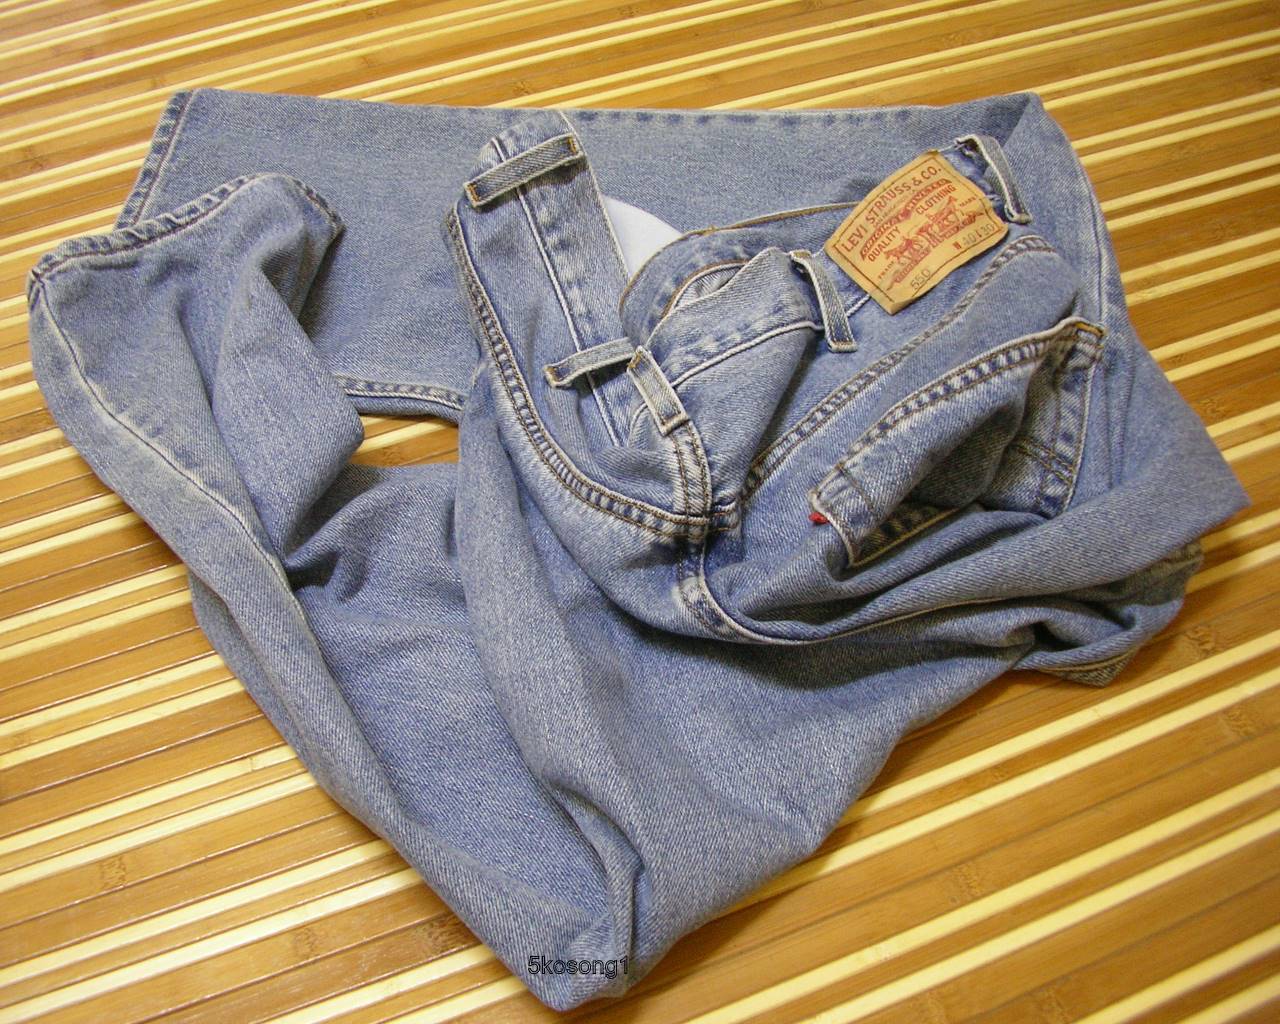 5kosong1: Levi’s 550 Relaxed Fit vs Levi’s 560 Comfort Fit